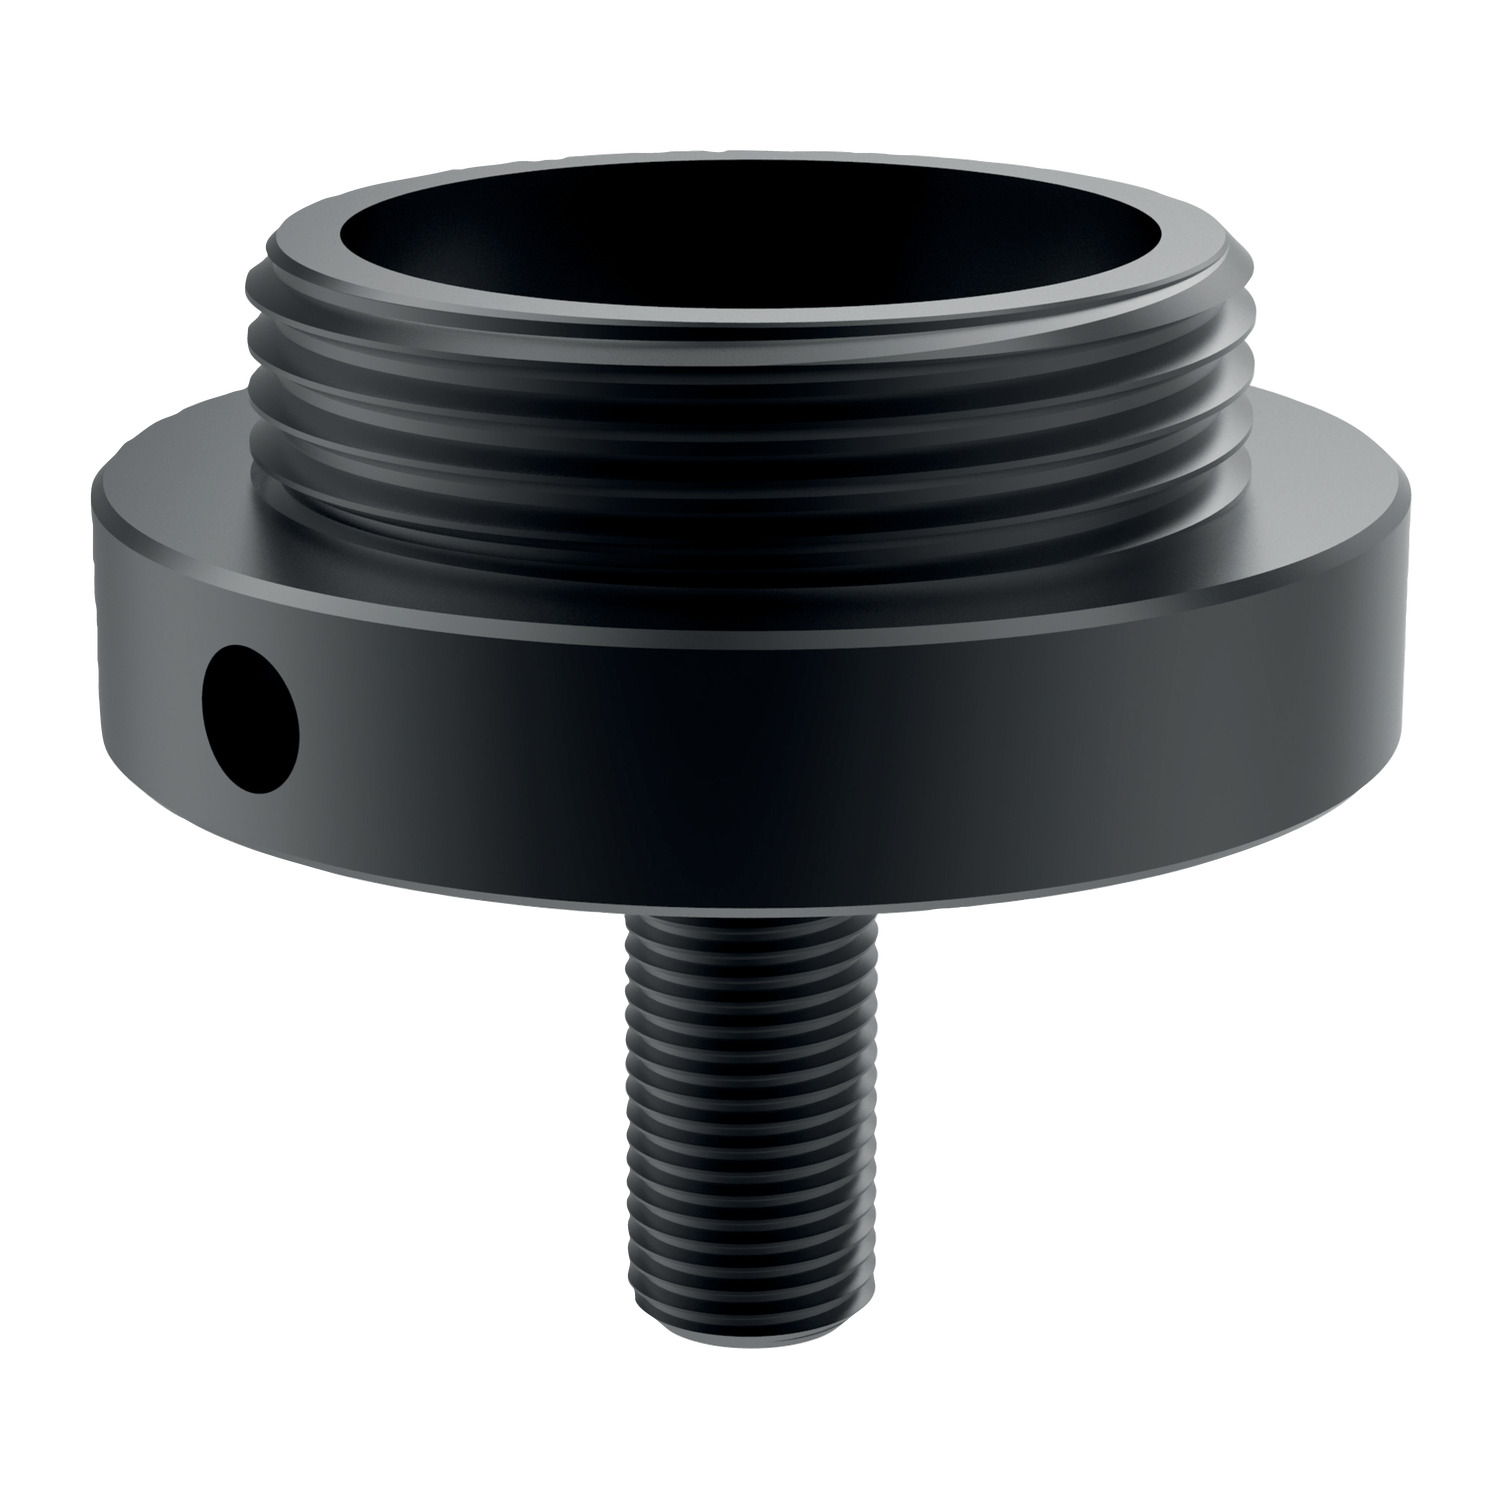 Product 15062, Centering Pad - Threaded for screw jacks / 